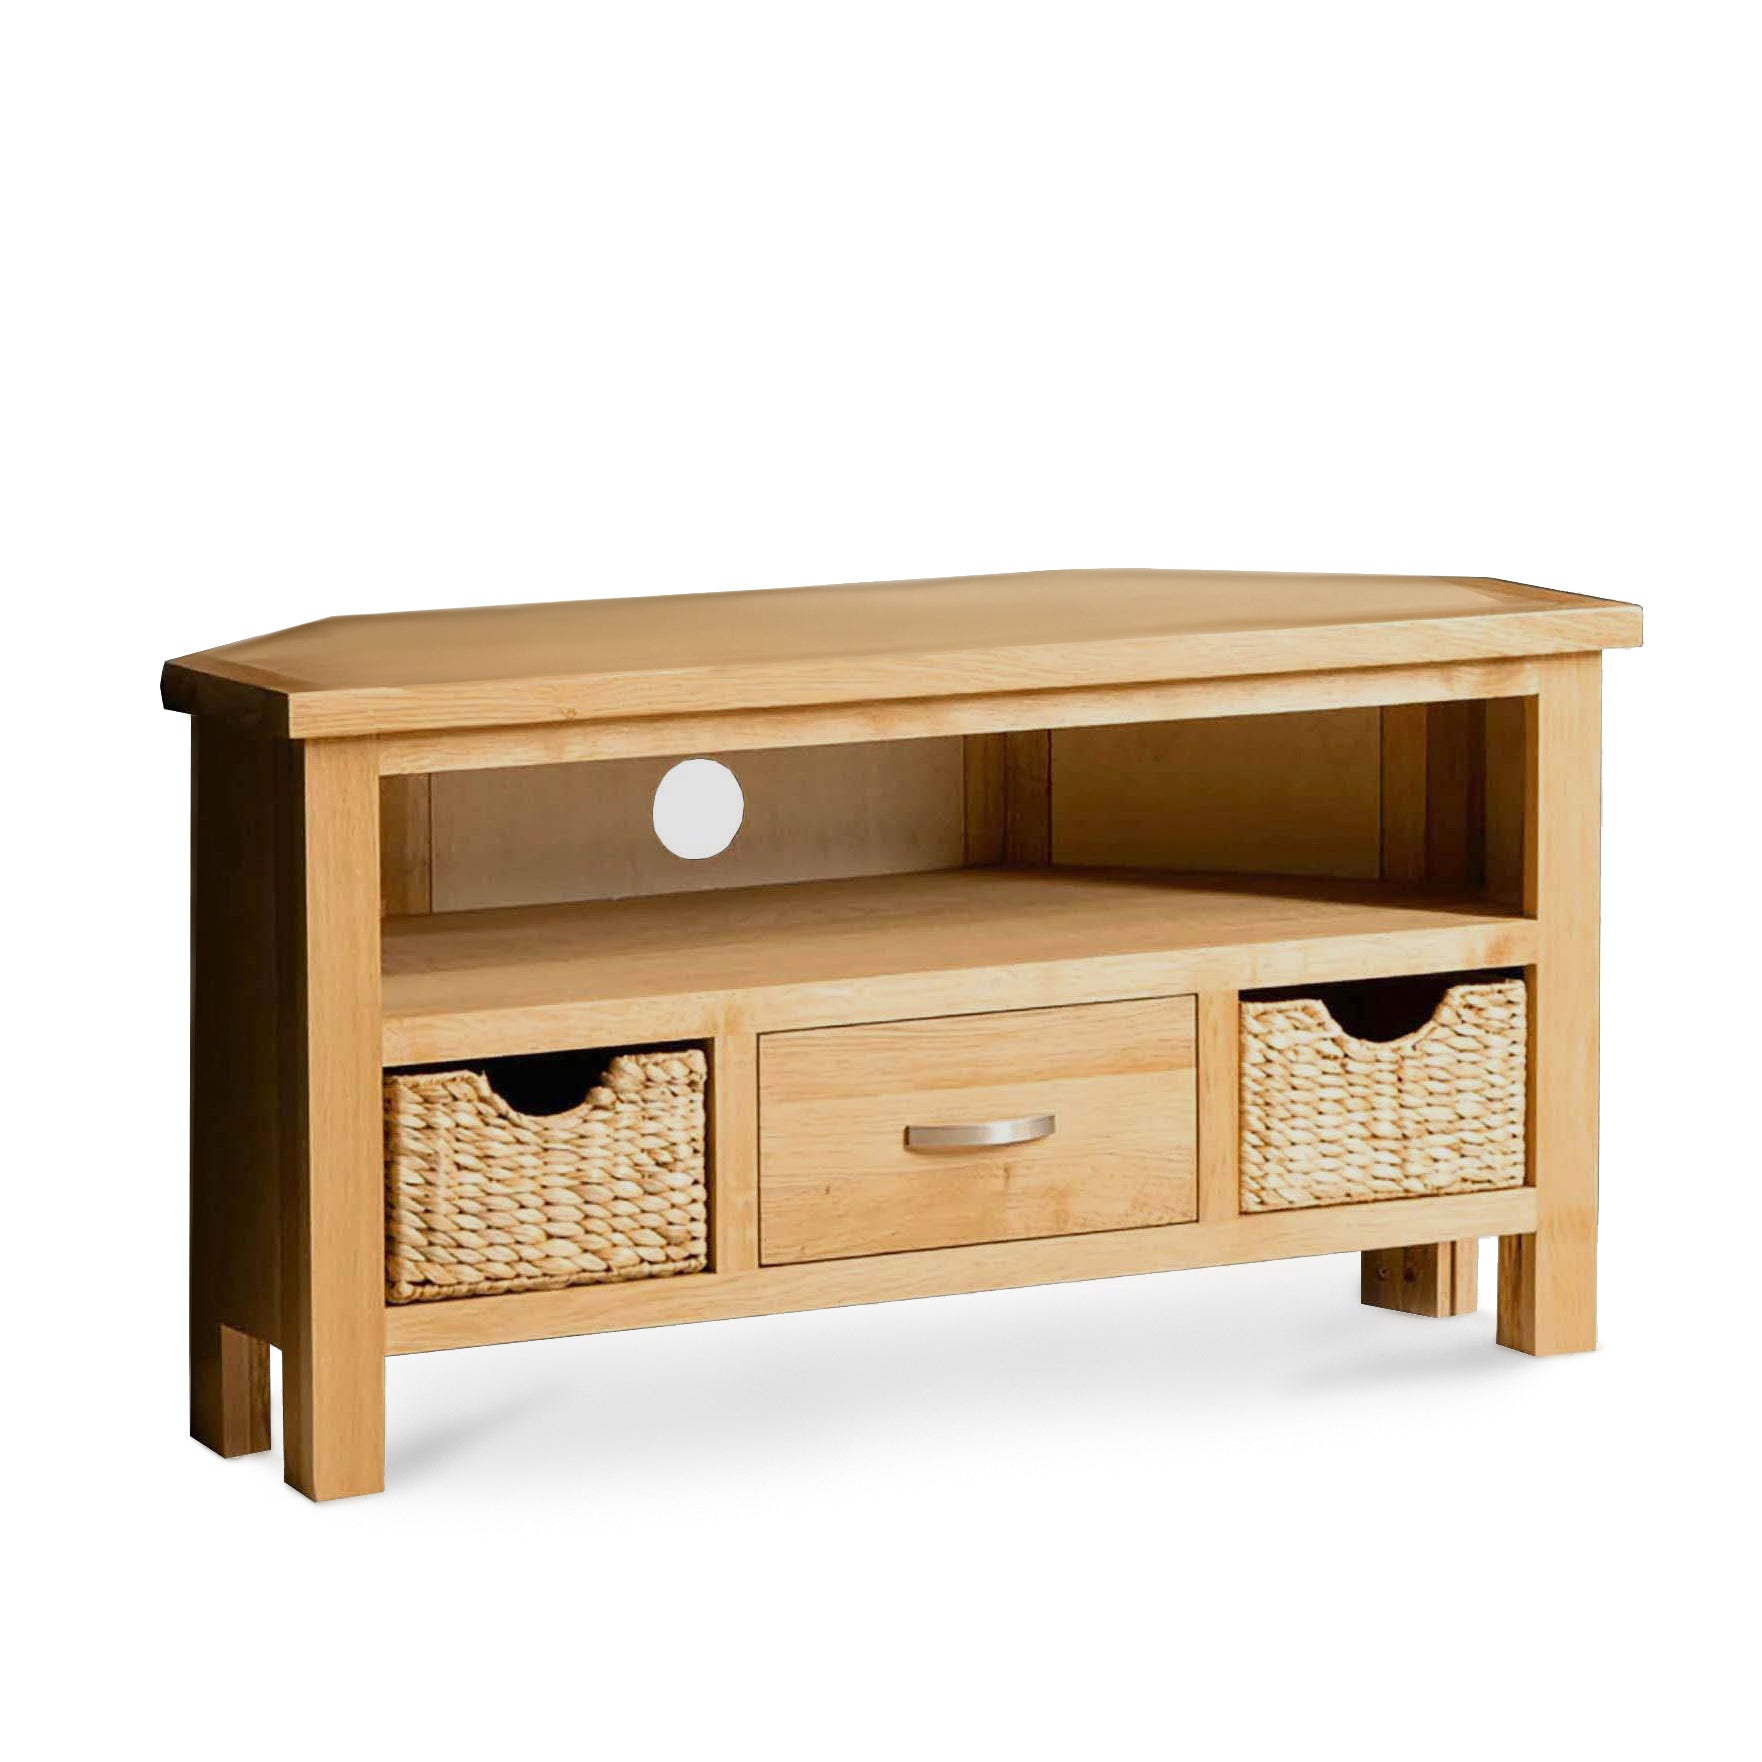 London Oak Corner Tv Stand With Baskets For Screens Up To 56 Oak